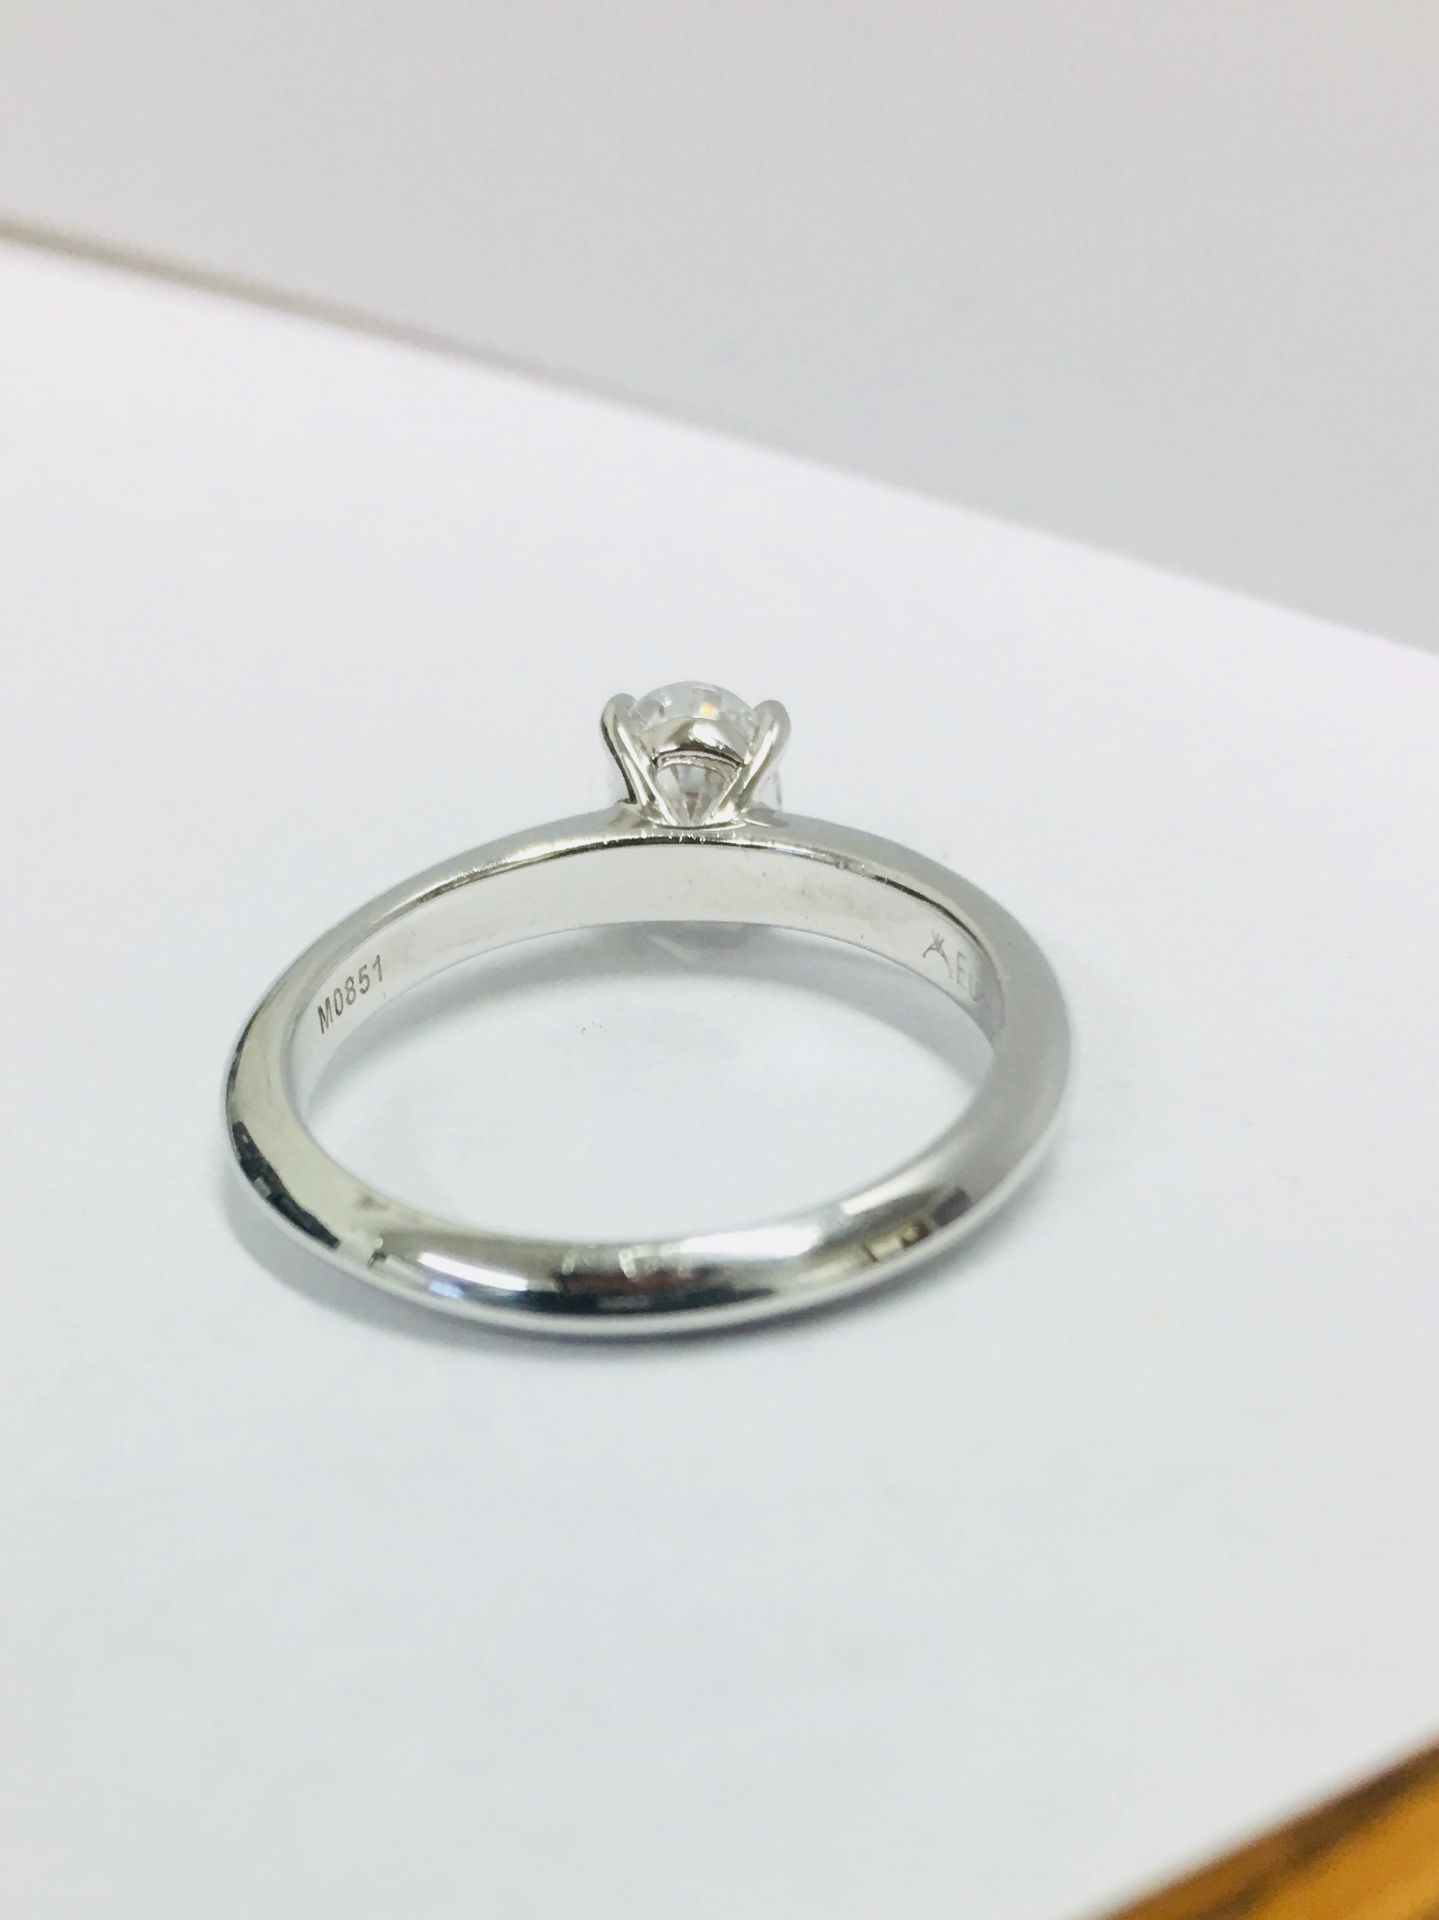 Platinum oval diamond solitaire ring.0.30ct oval diamond si clarity i colour,2.9gms platinum setting - Image 2 of 4